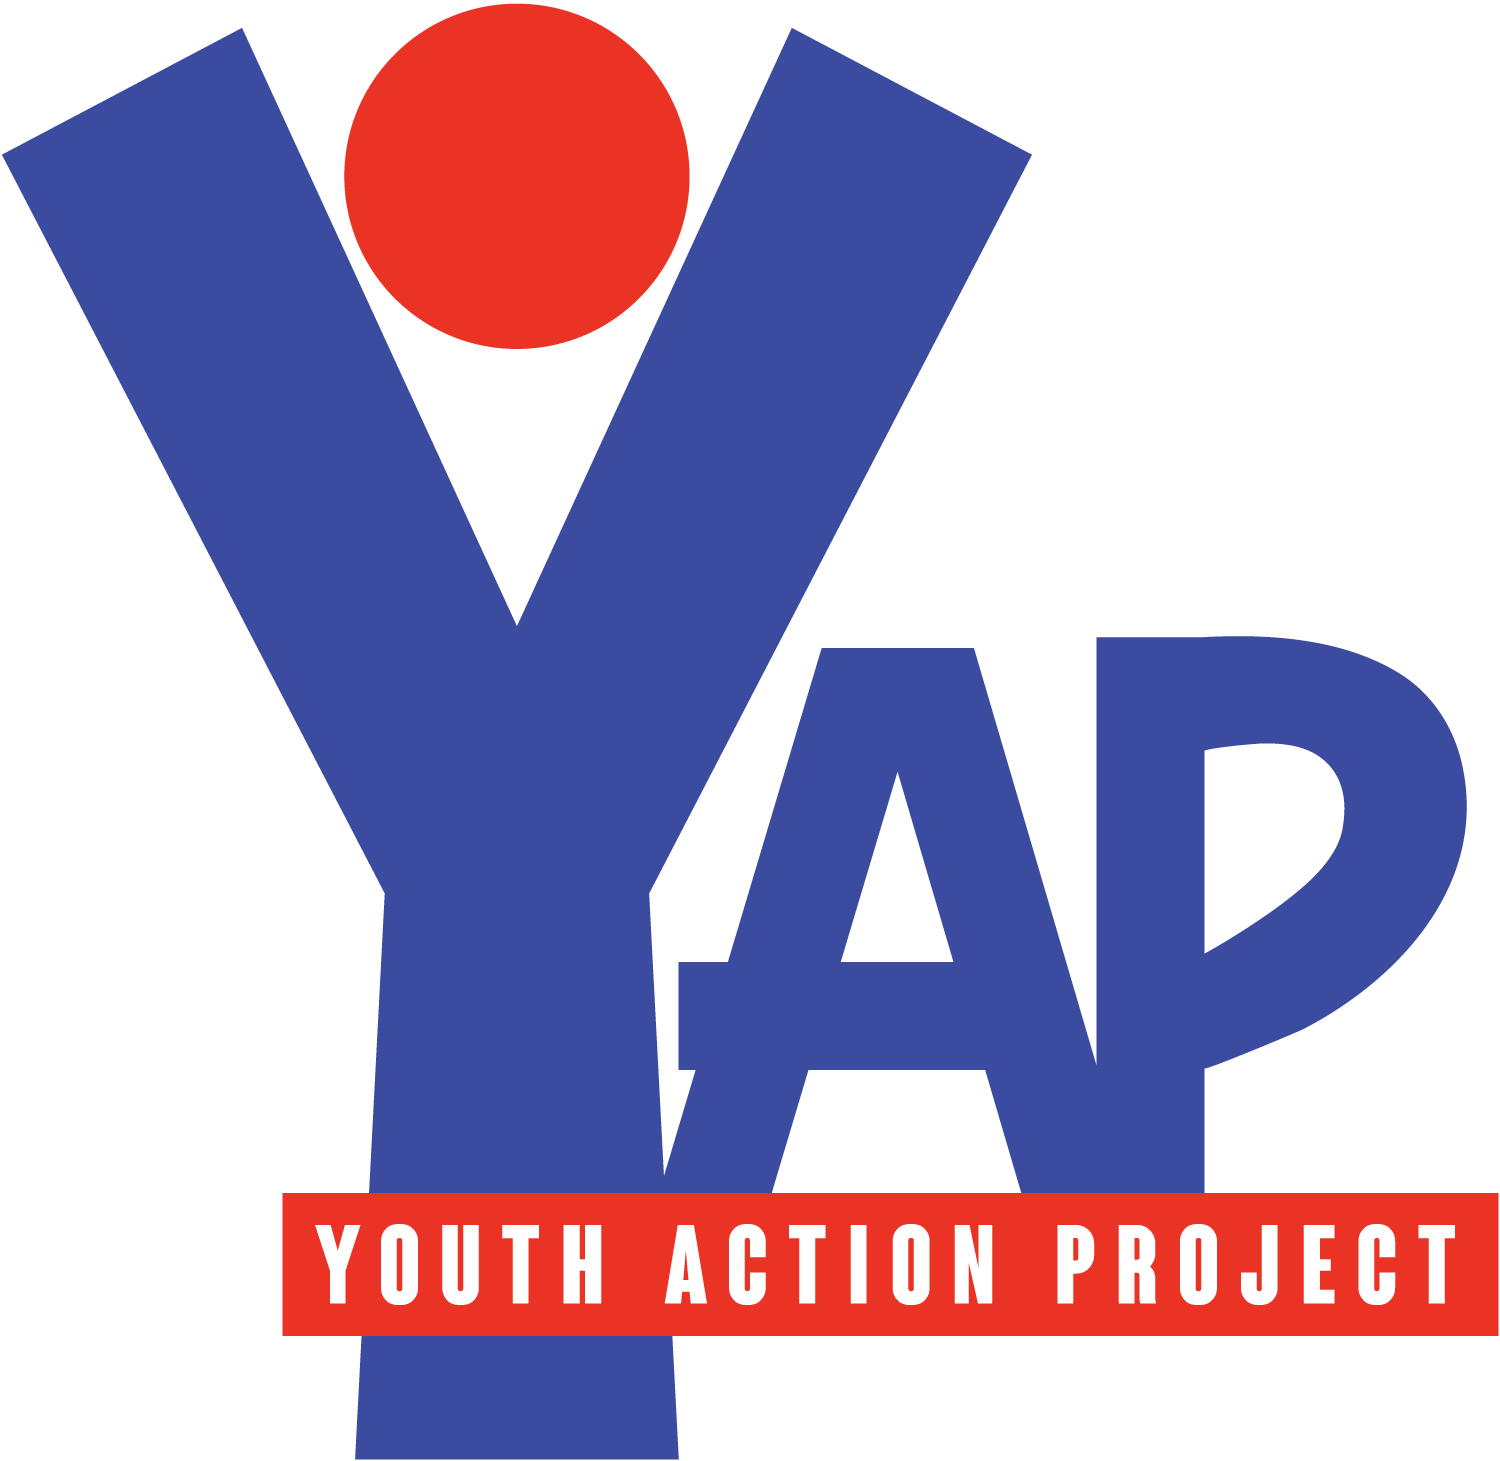 yap-youth-action-project-logo-full